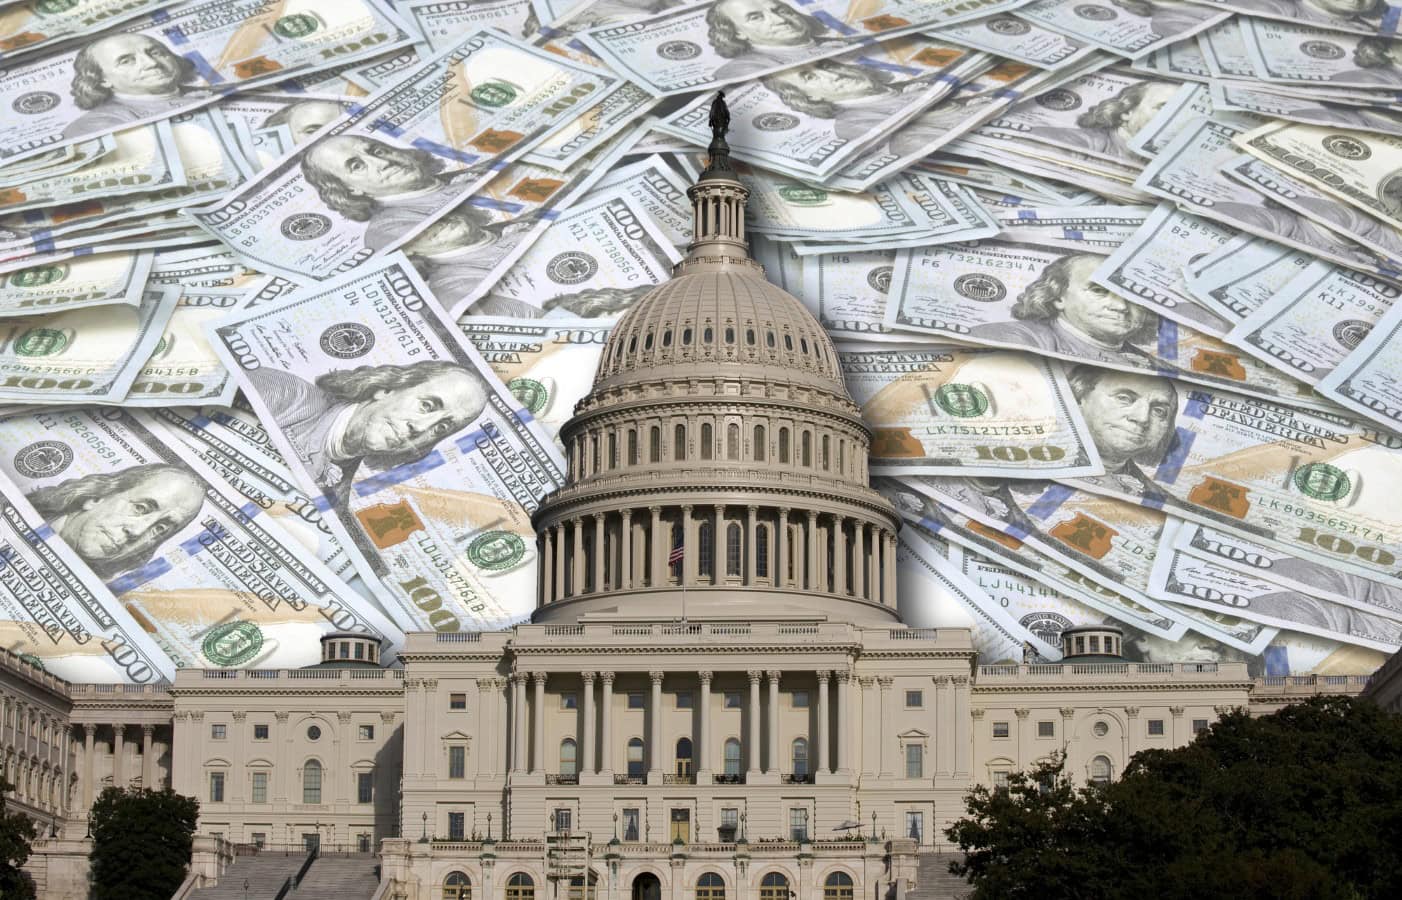 Congress spending and wasting your money.